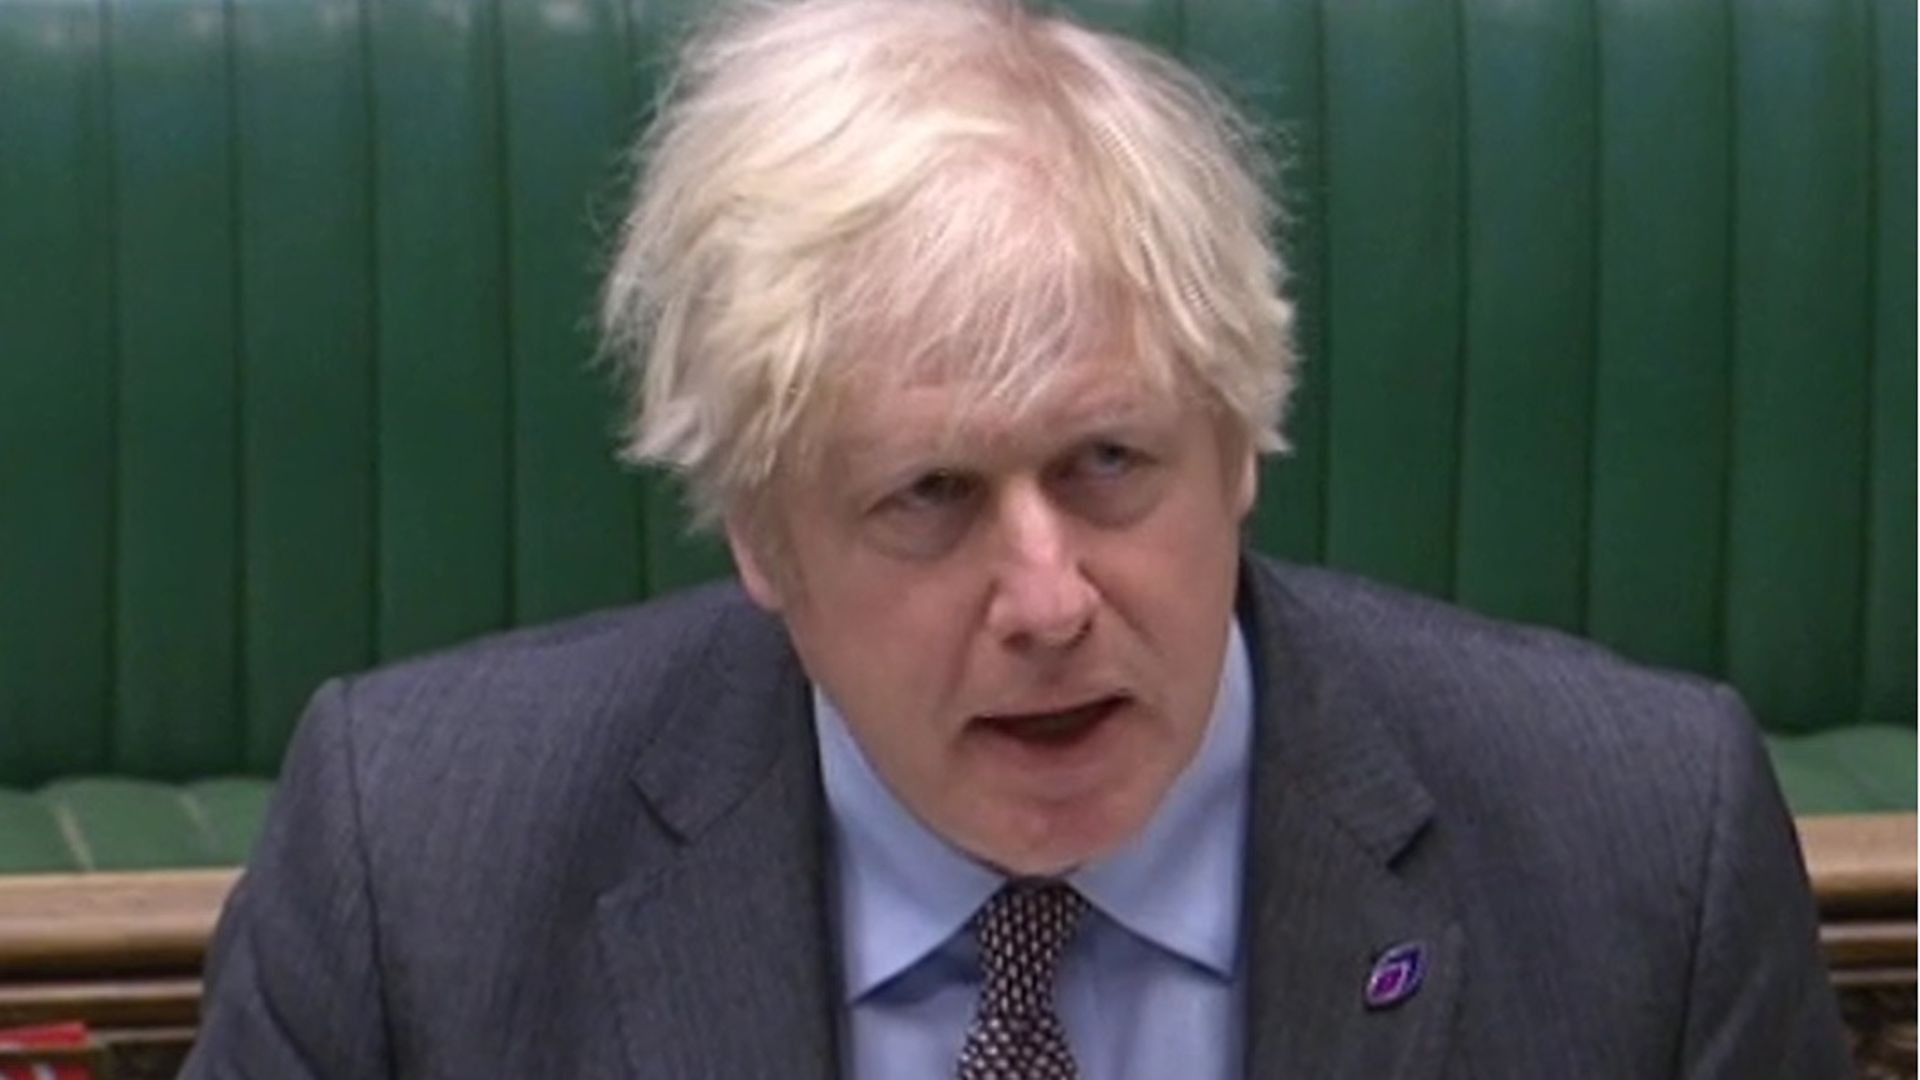 Boris Johnson speaking at prime minister's questions in the House of Commons - Credit: Parliament